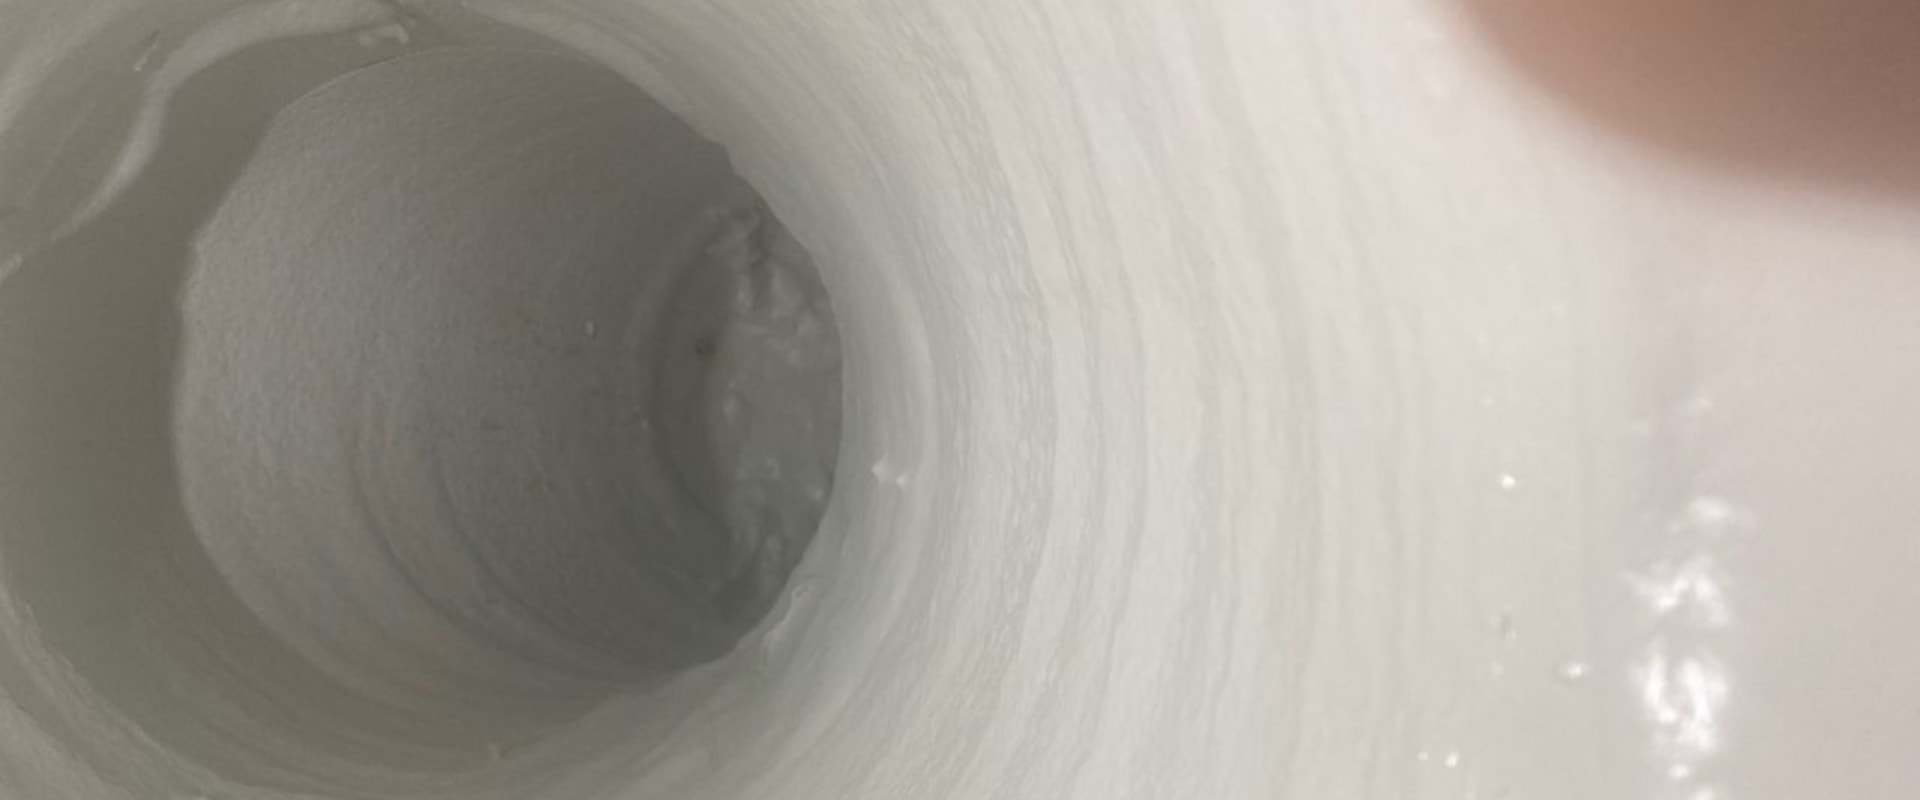 Air Duct Sealing in West Palm Beach, FL: What You Need to Know